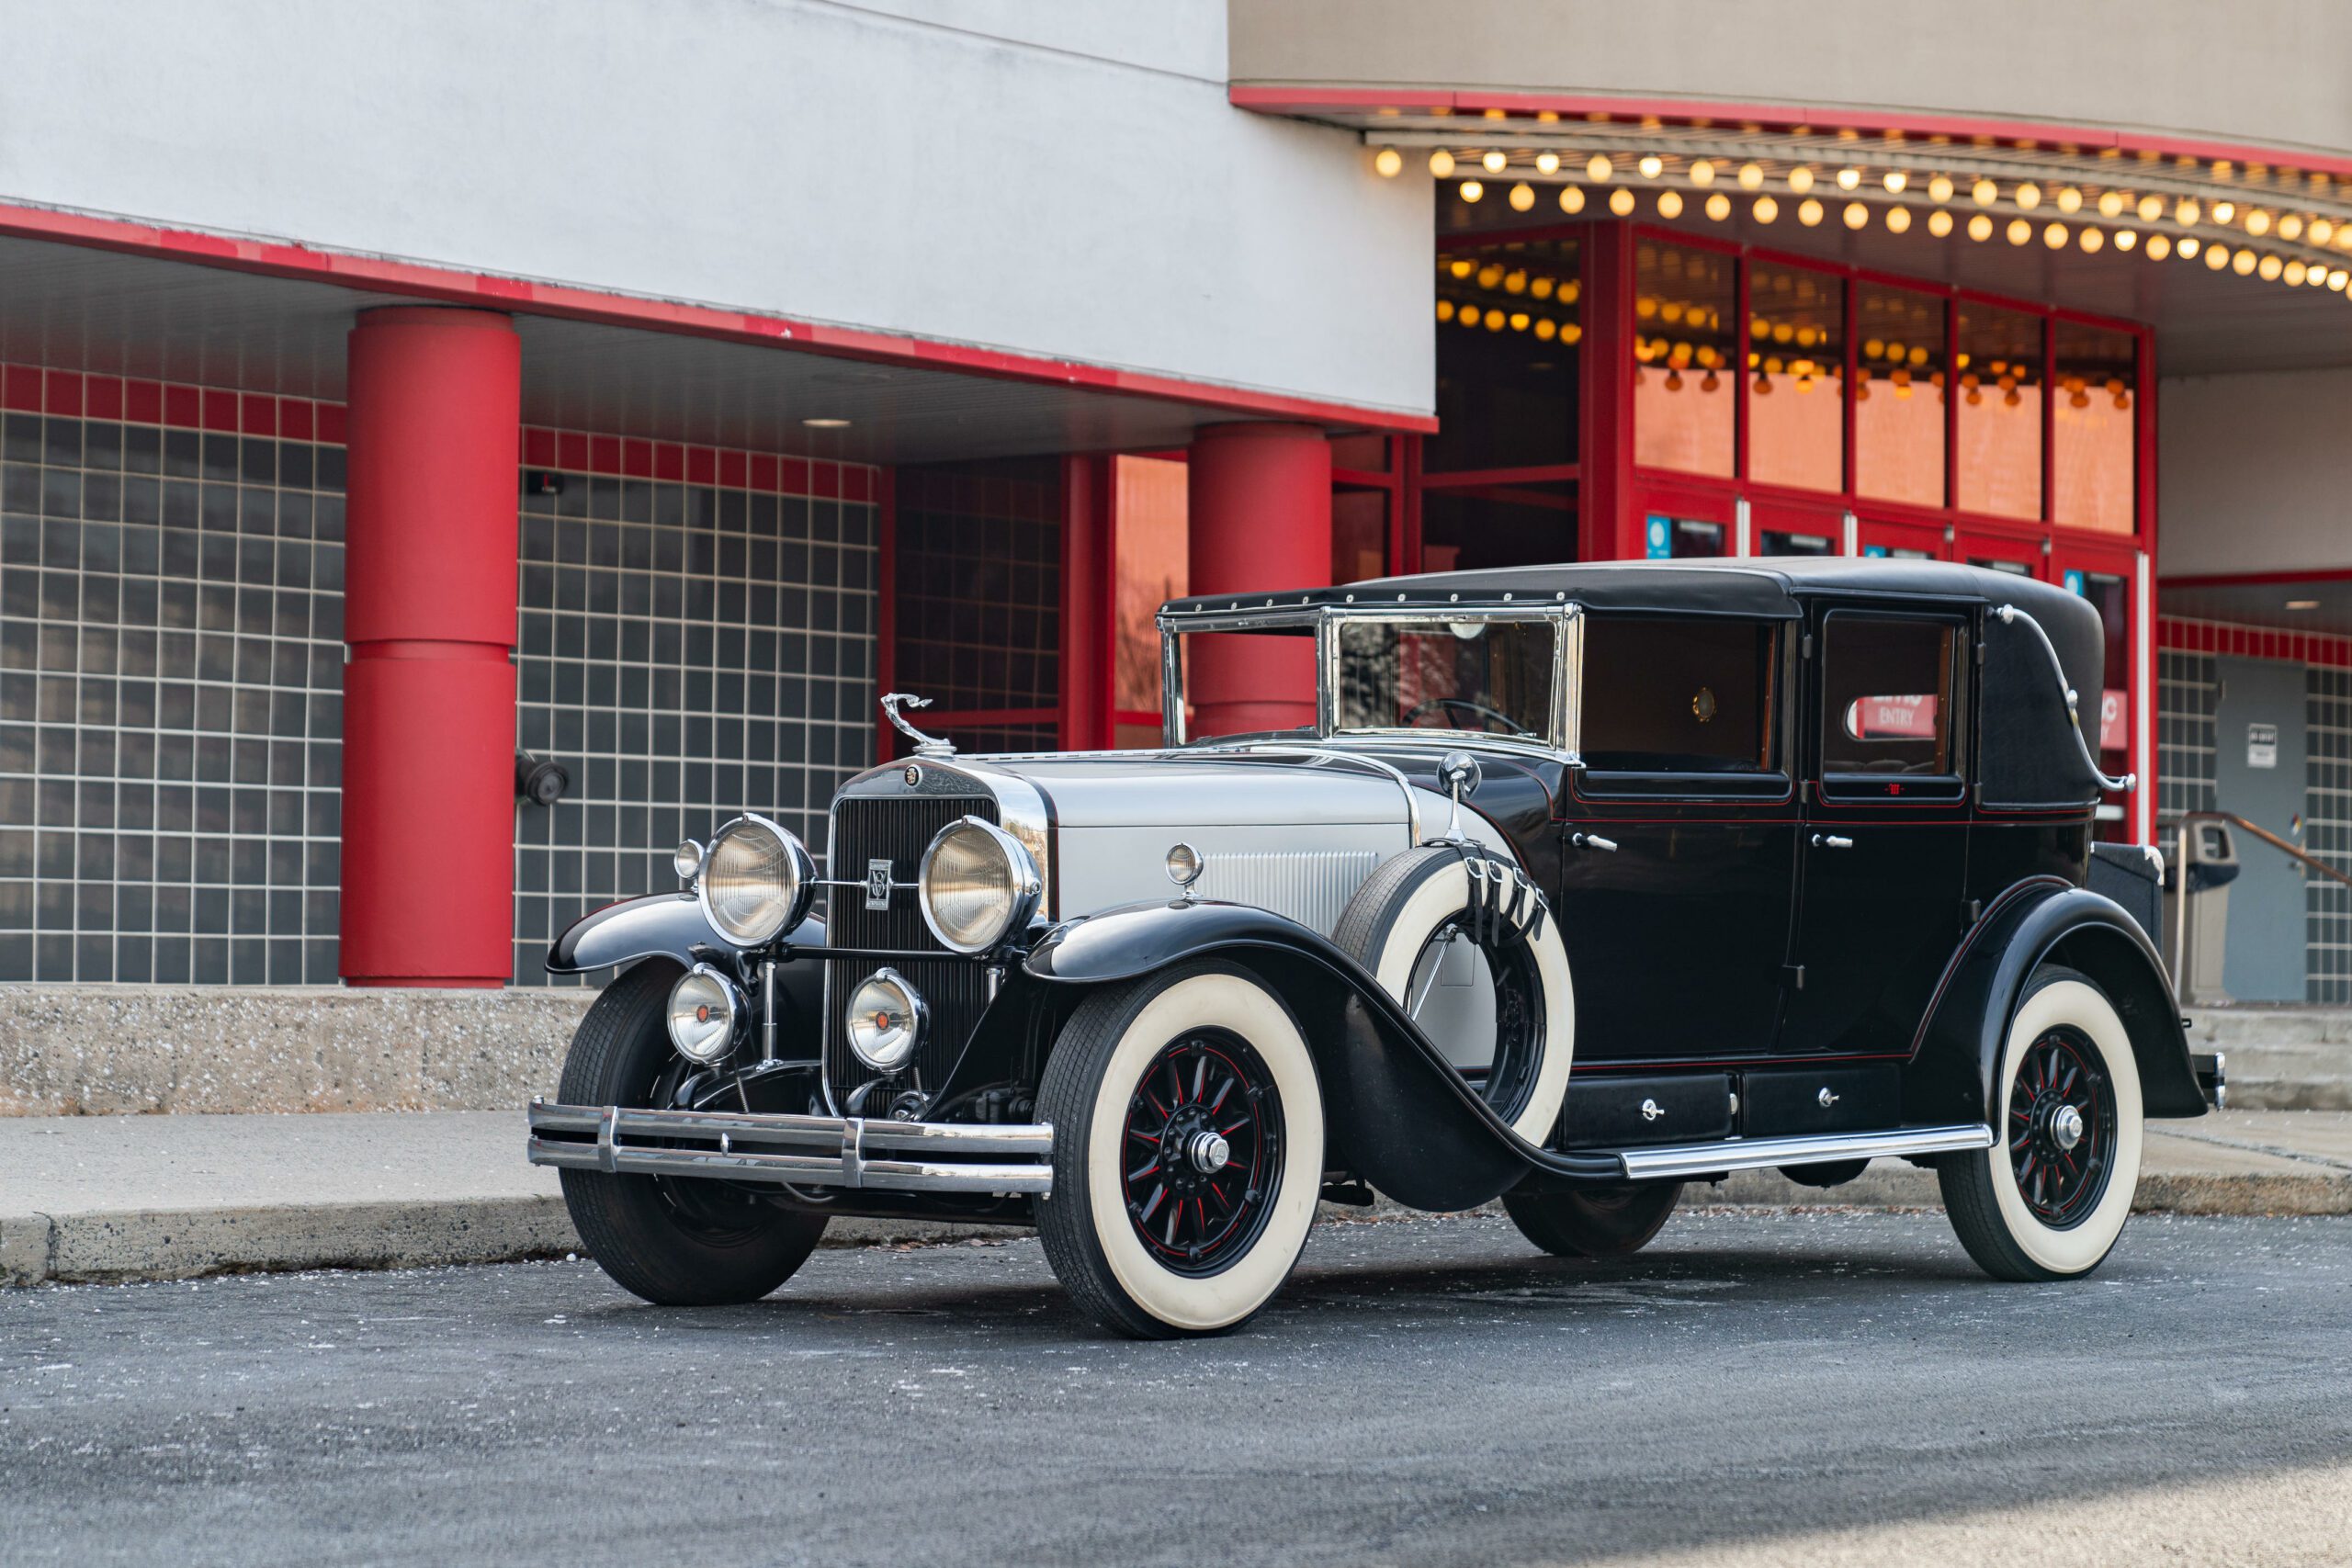 1929 Cadillac Series 341-B V-8 Transformable Town Cabriolet